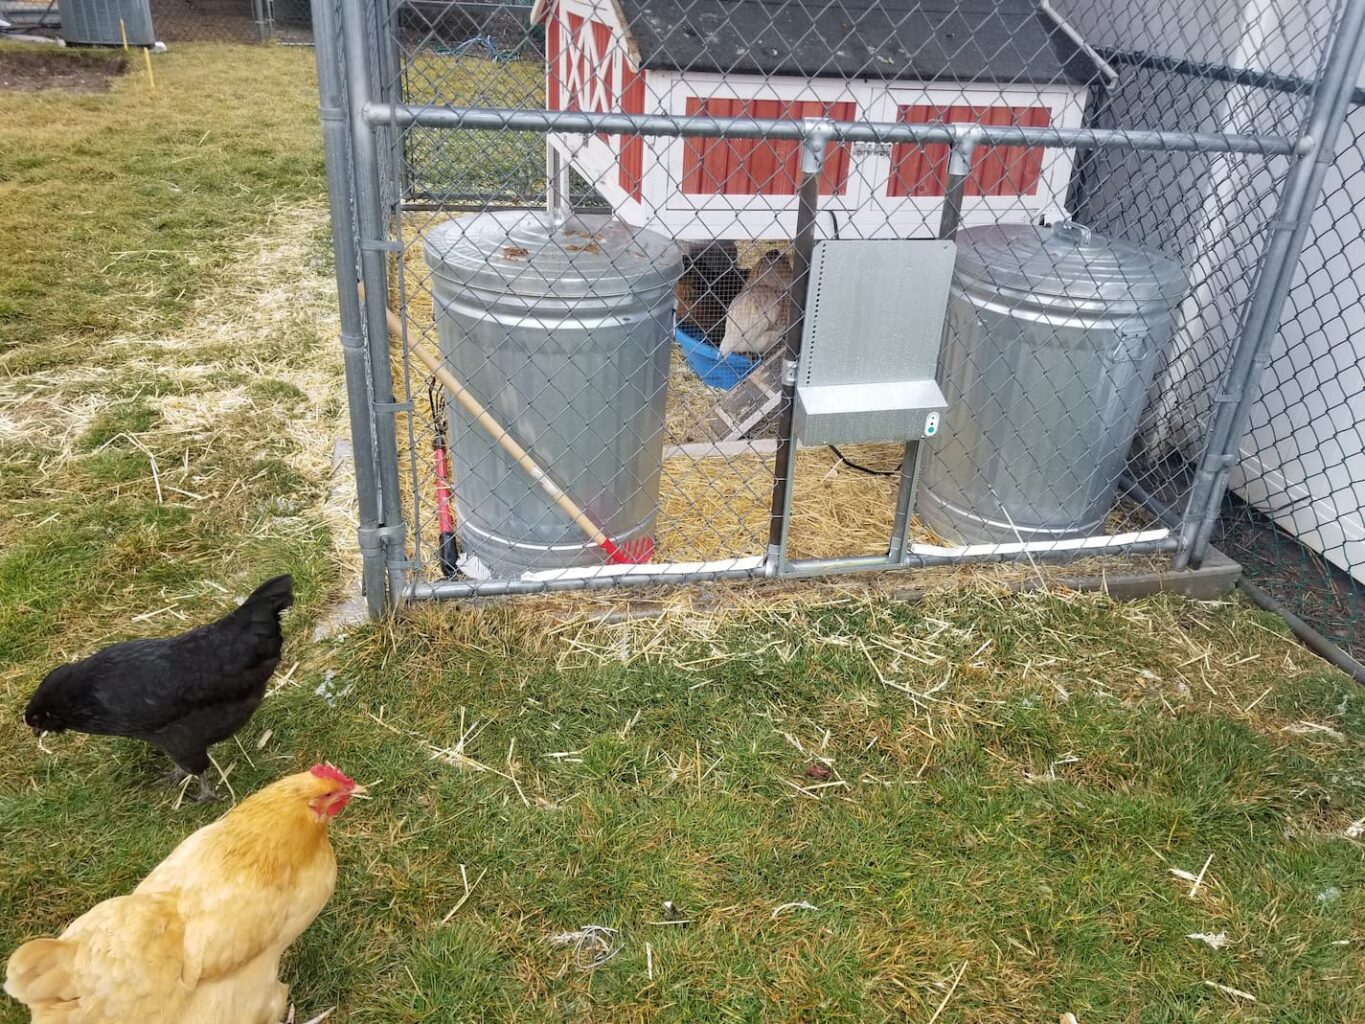 An image of the chicken coop and chickens in the pasture.